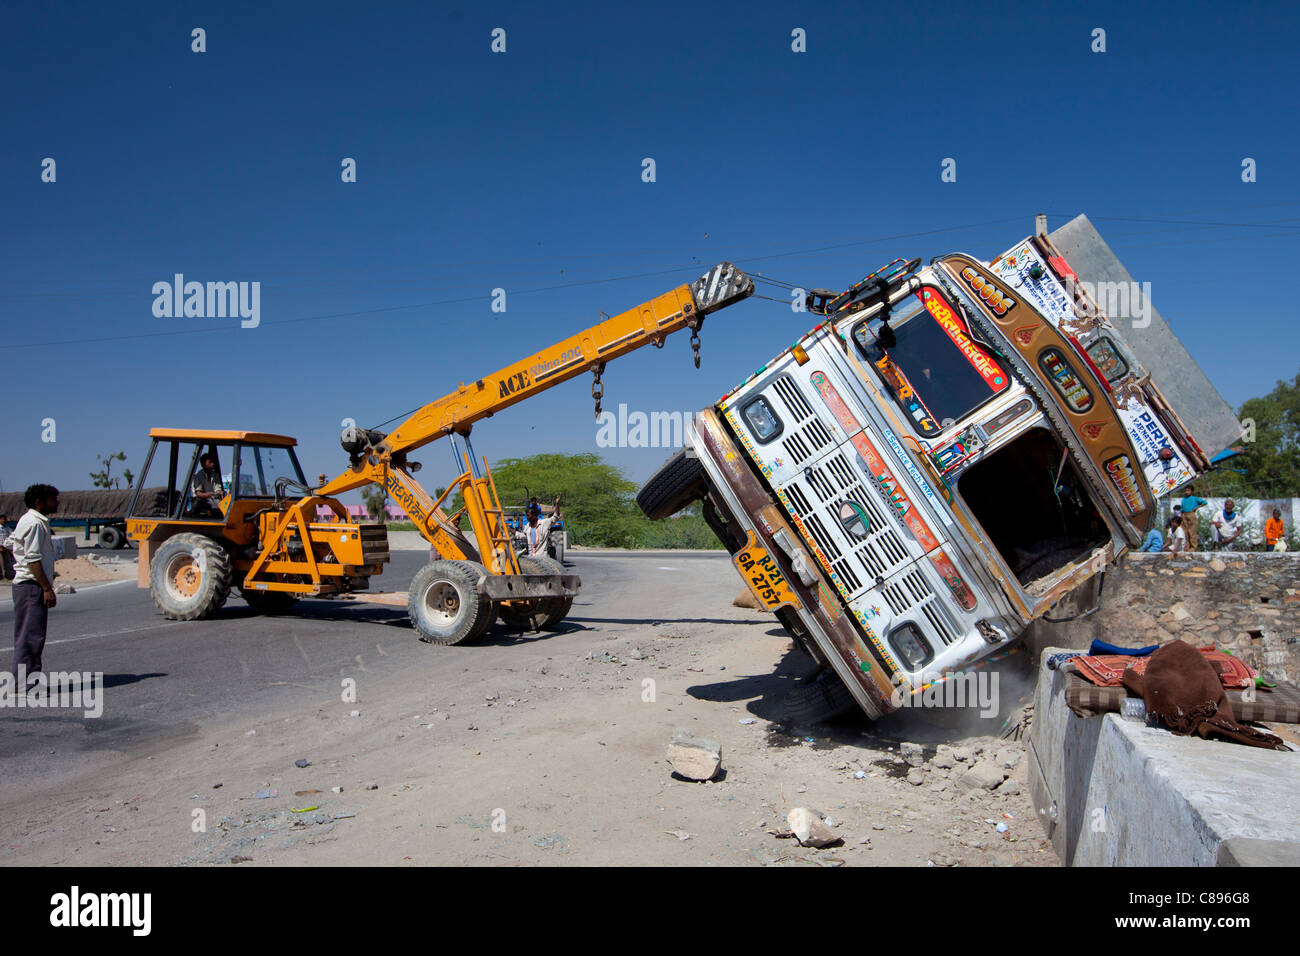 Truck overturned in traffic accident on Delhi to Mumbai National Highway 8 at Jaipur, Rajasthan, Northern India Stock Photo